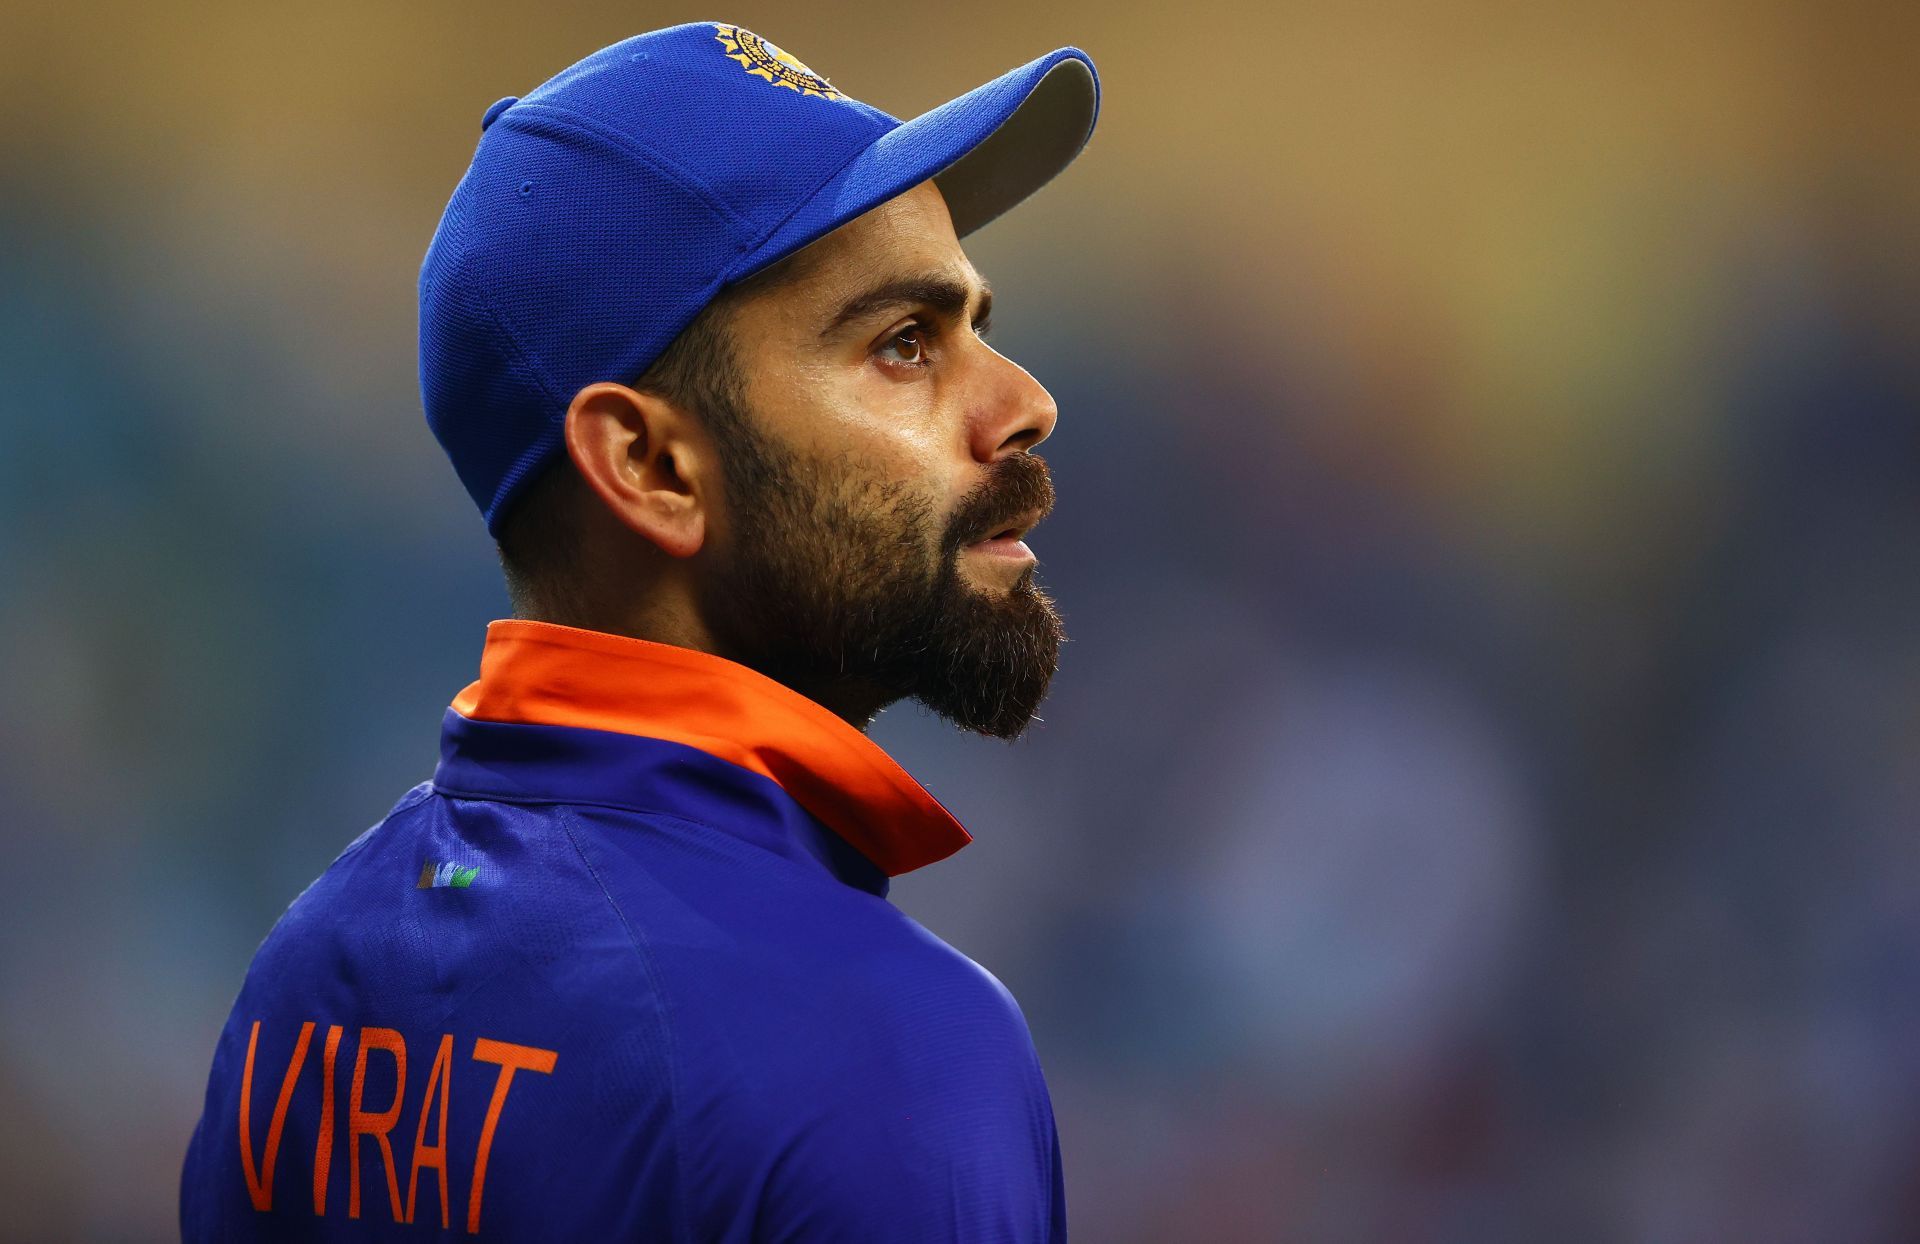 Virat Kohli failed to win an ICC trophy as limited-overs captain. Pic: Getty Images